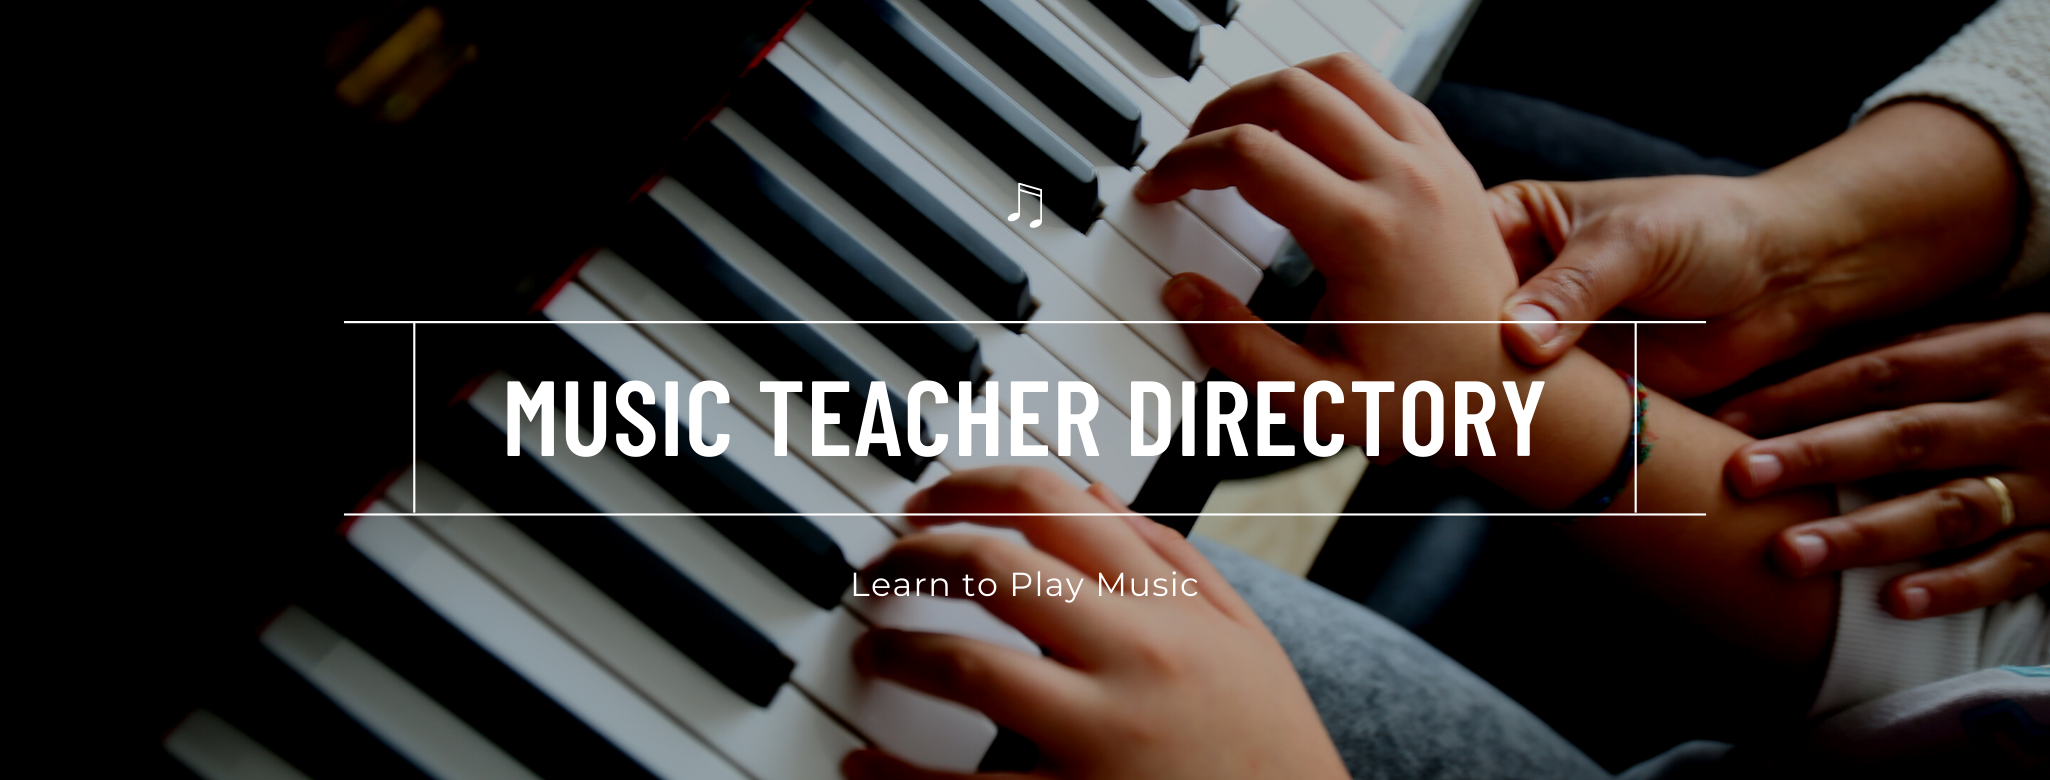 How to Have a Piano Group Class Online - Piano with Lauren